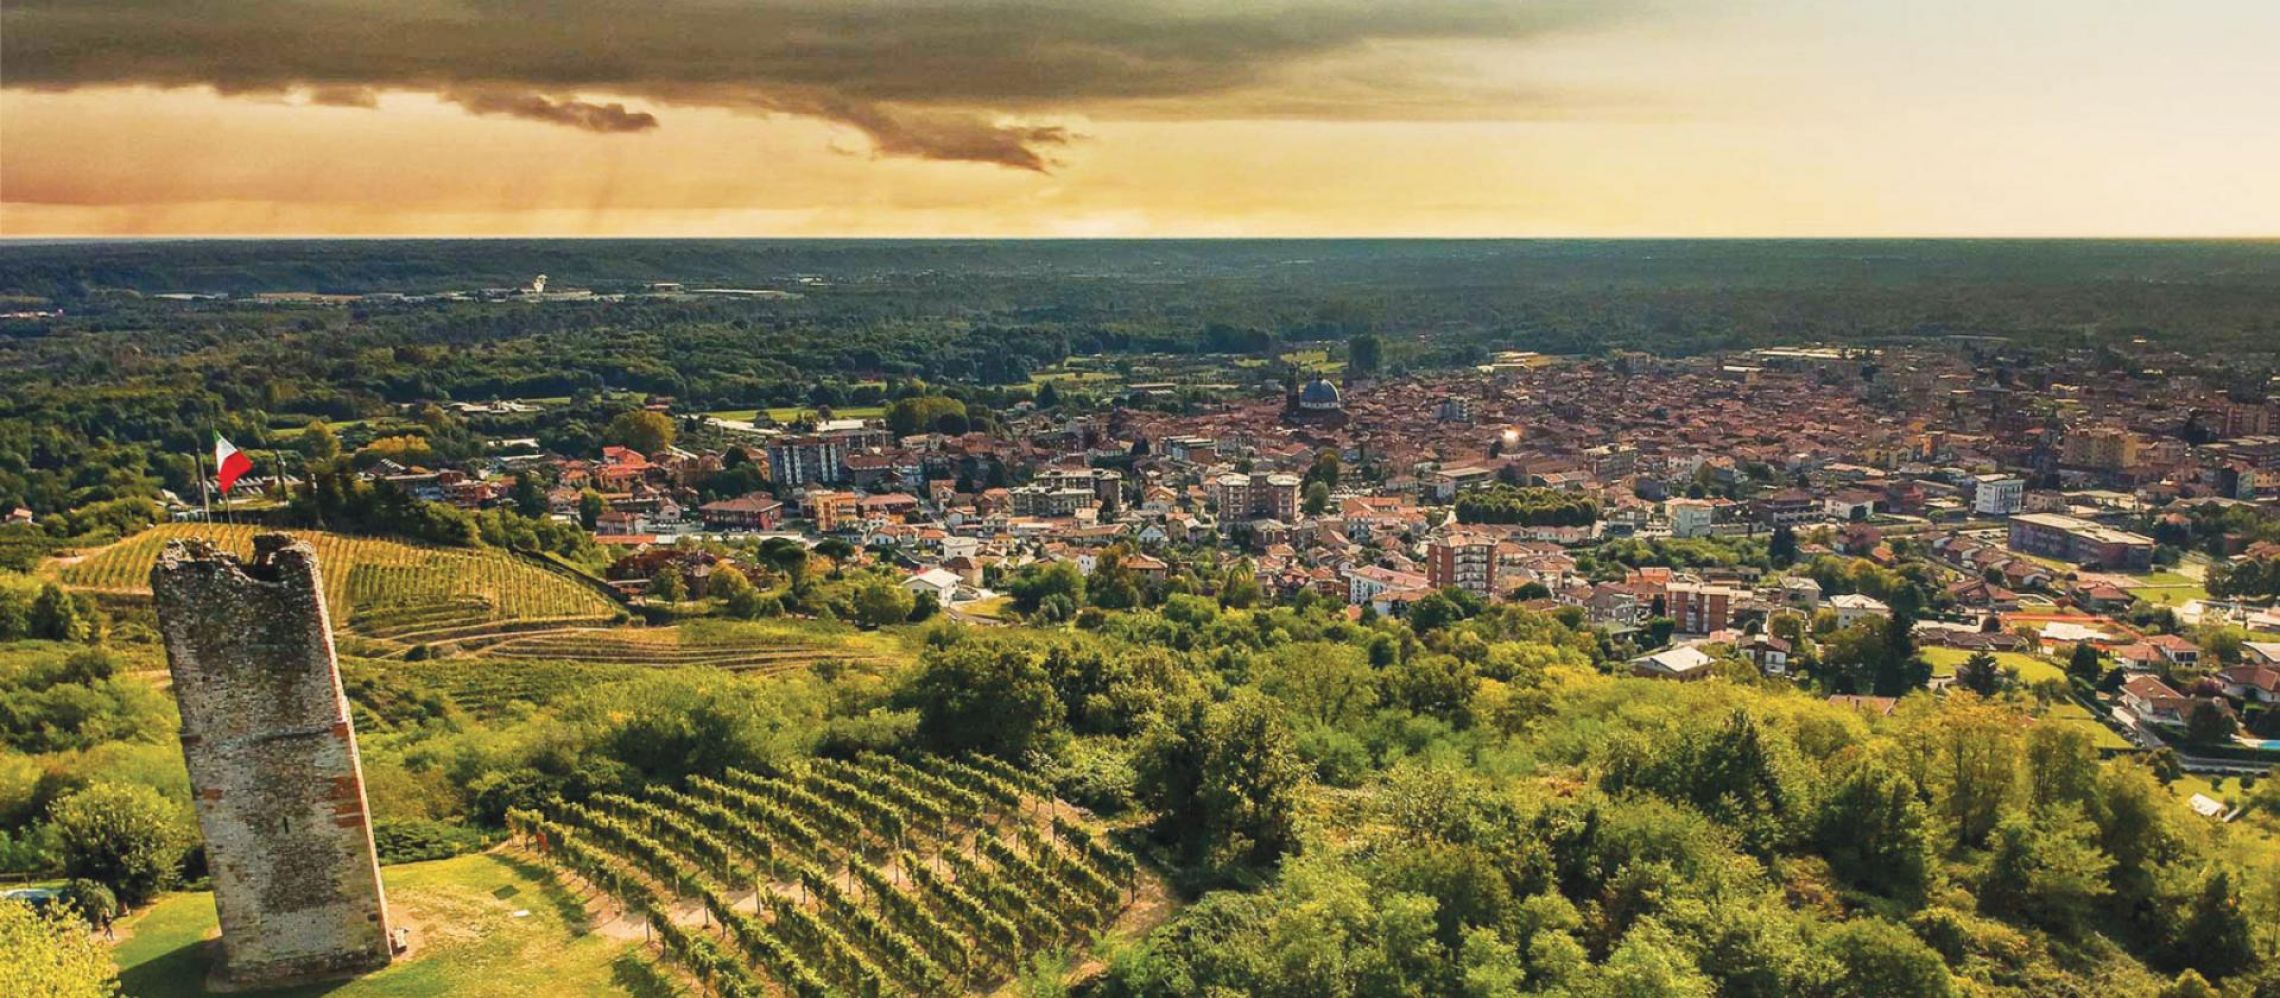 Photo for: Discovering Hidden Gems: Lesser-Known Alternatives to Barolo and Barbaresco